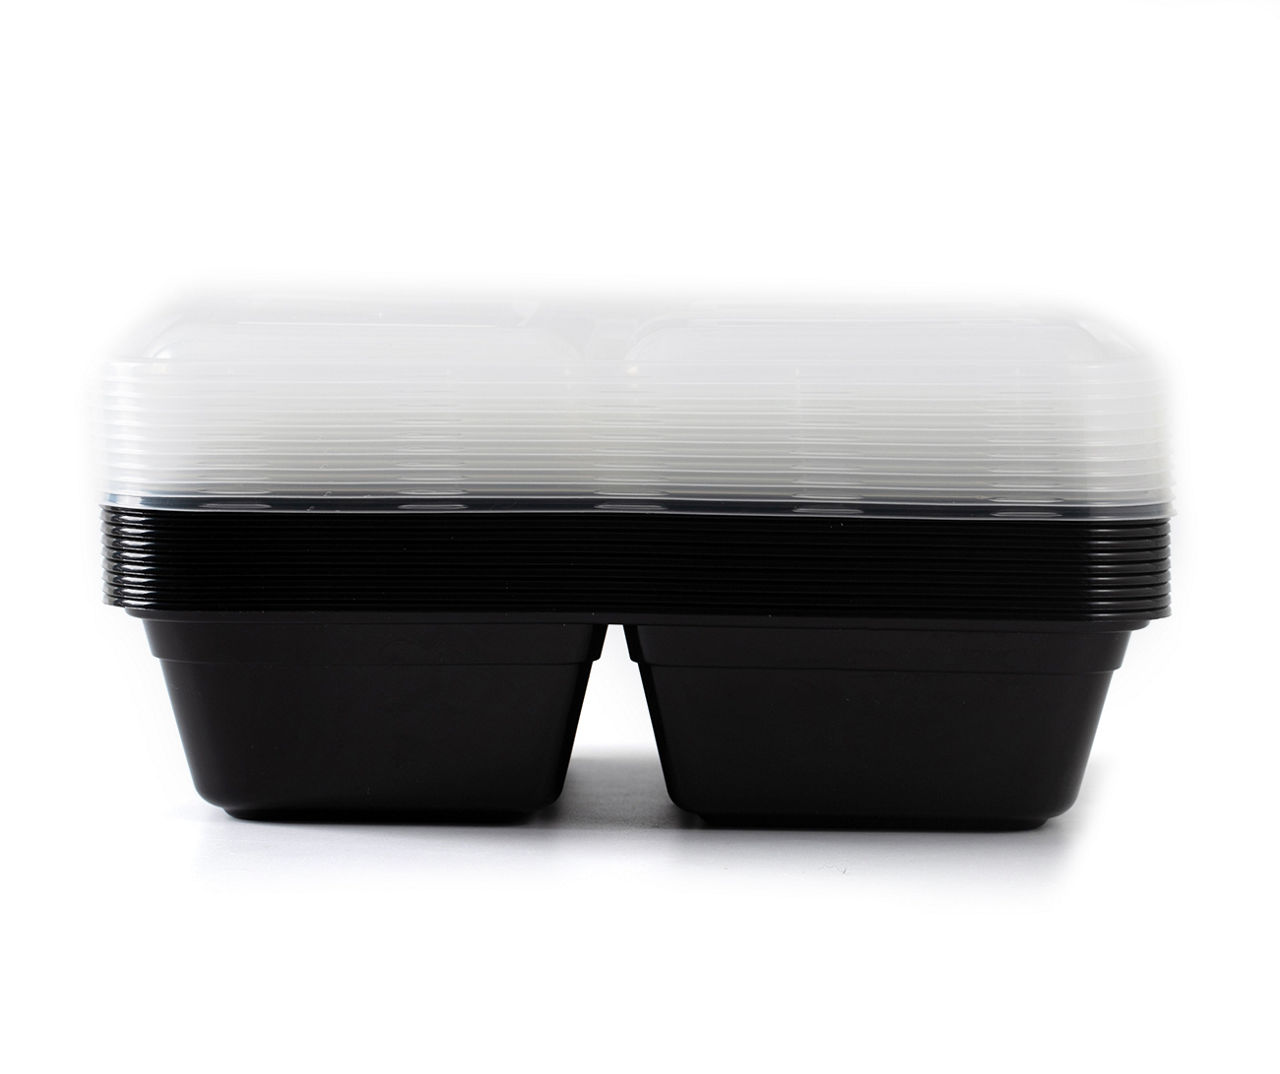 Meal Prep Containers 40oz Round Bowls with Lids, Disposable Food